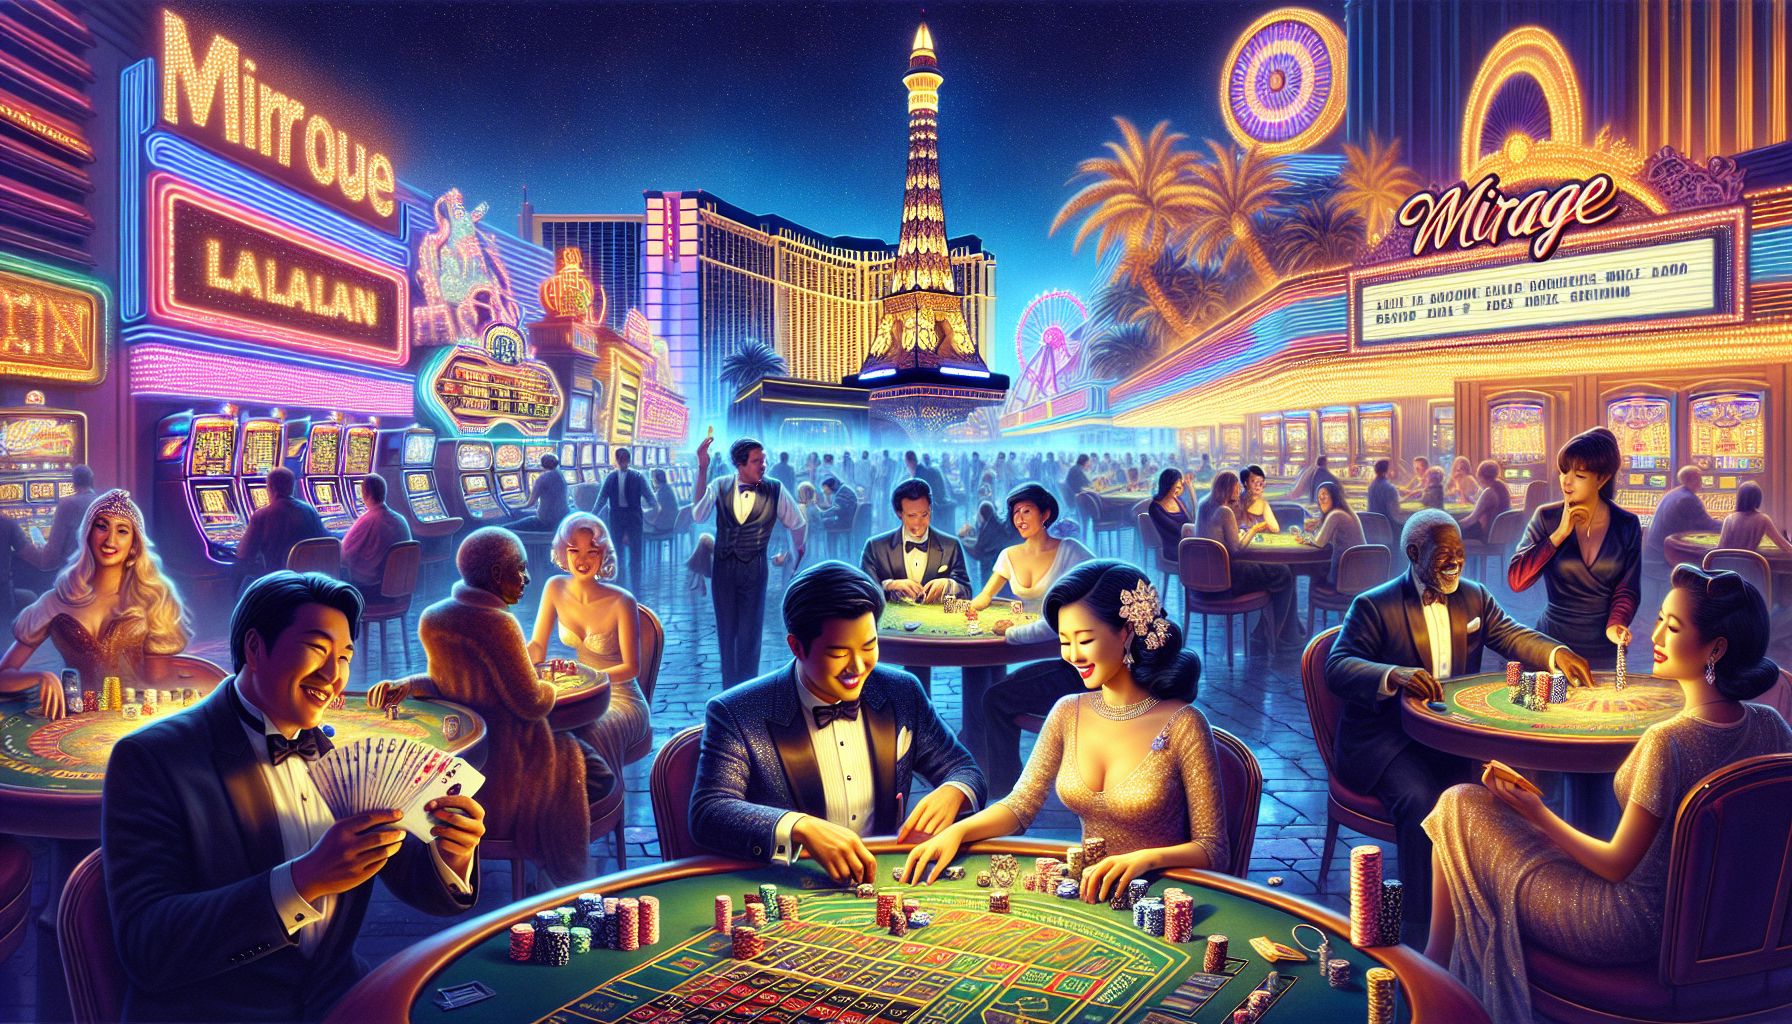 The Casino Mirage: Beyond the Lights and Glamour